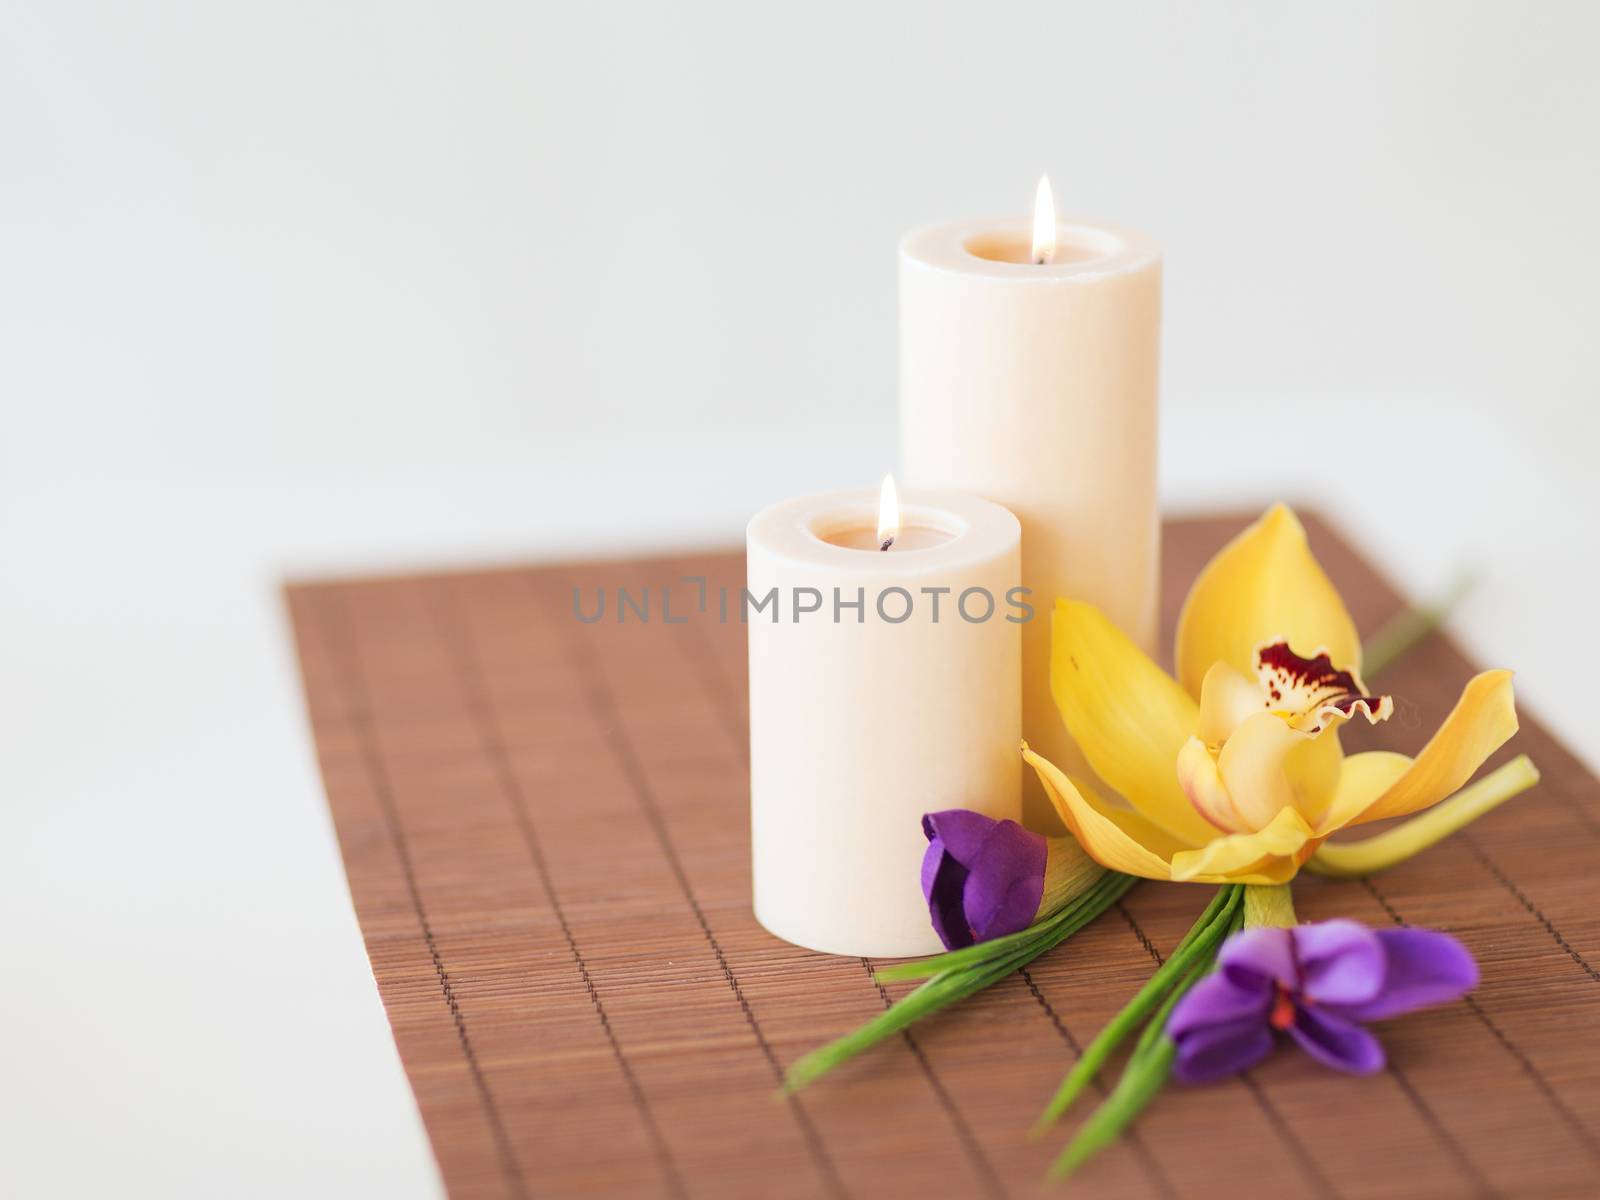 spa, health and beauty concept - candles, orchid and iris flowers on bamboo mat